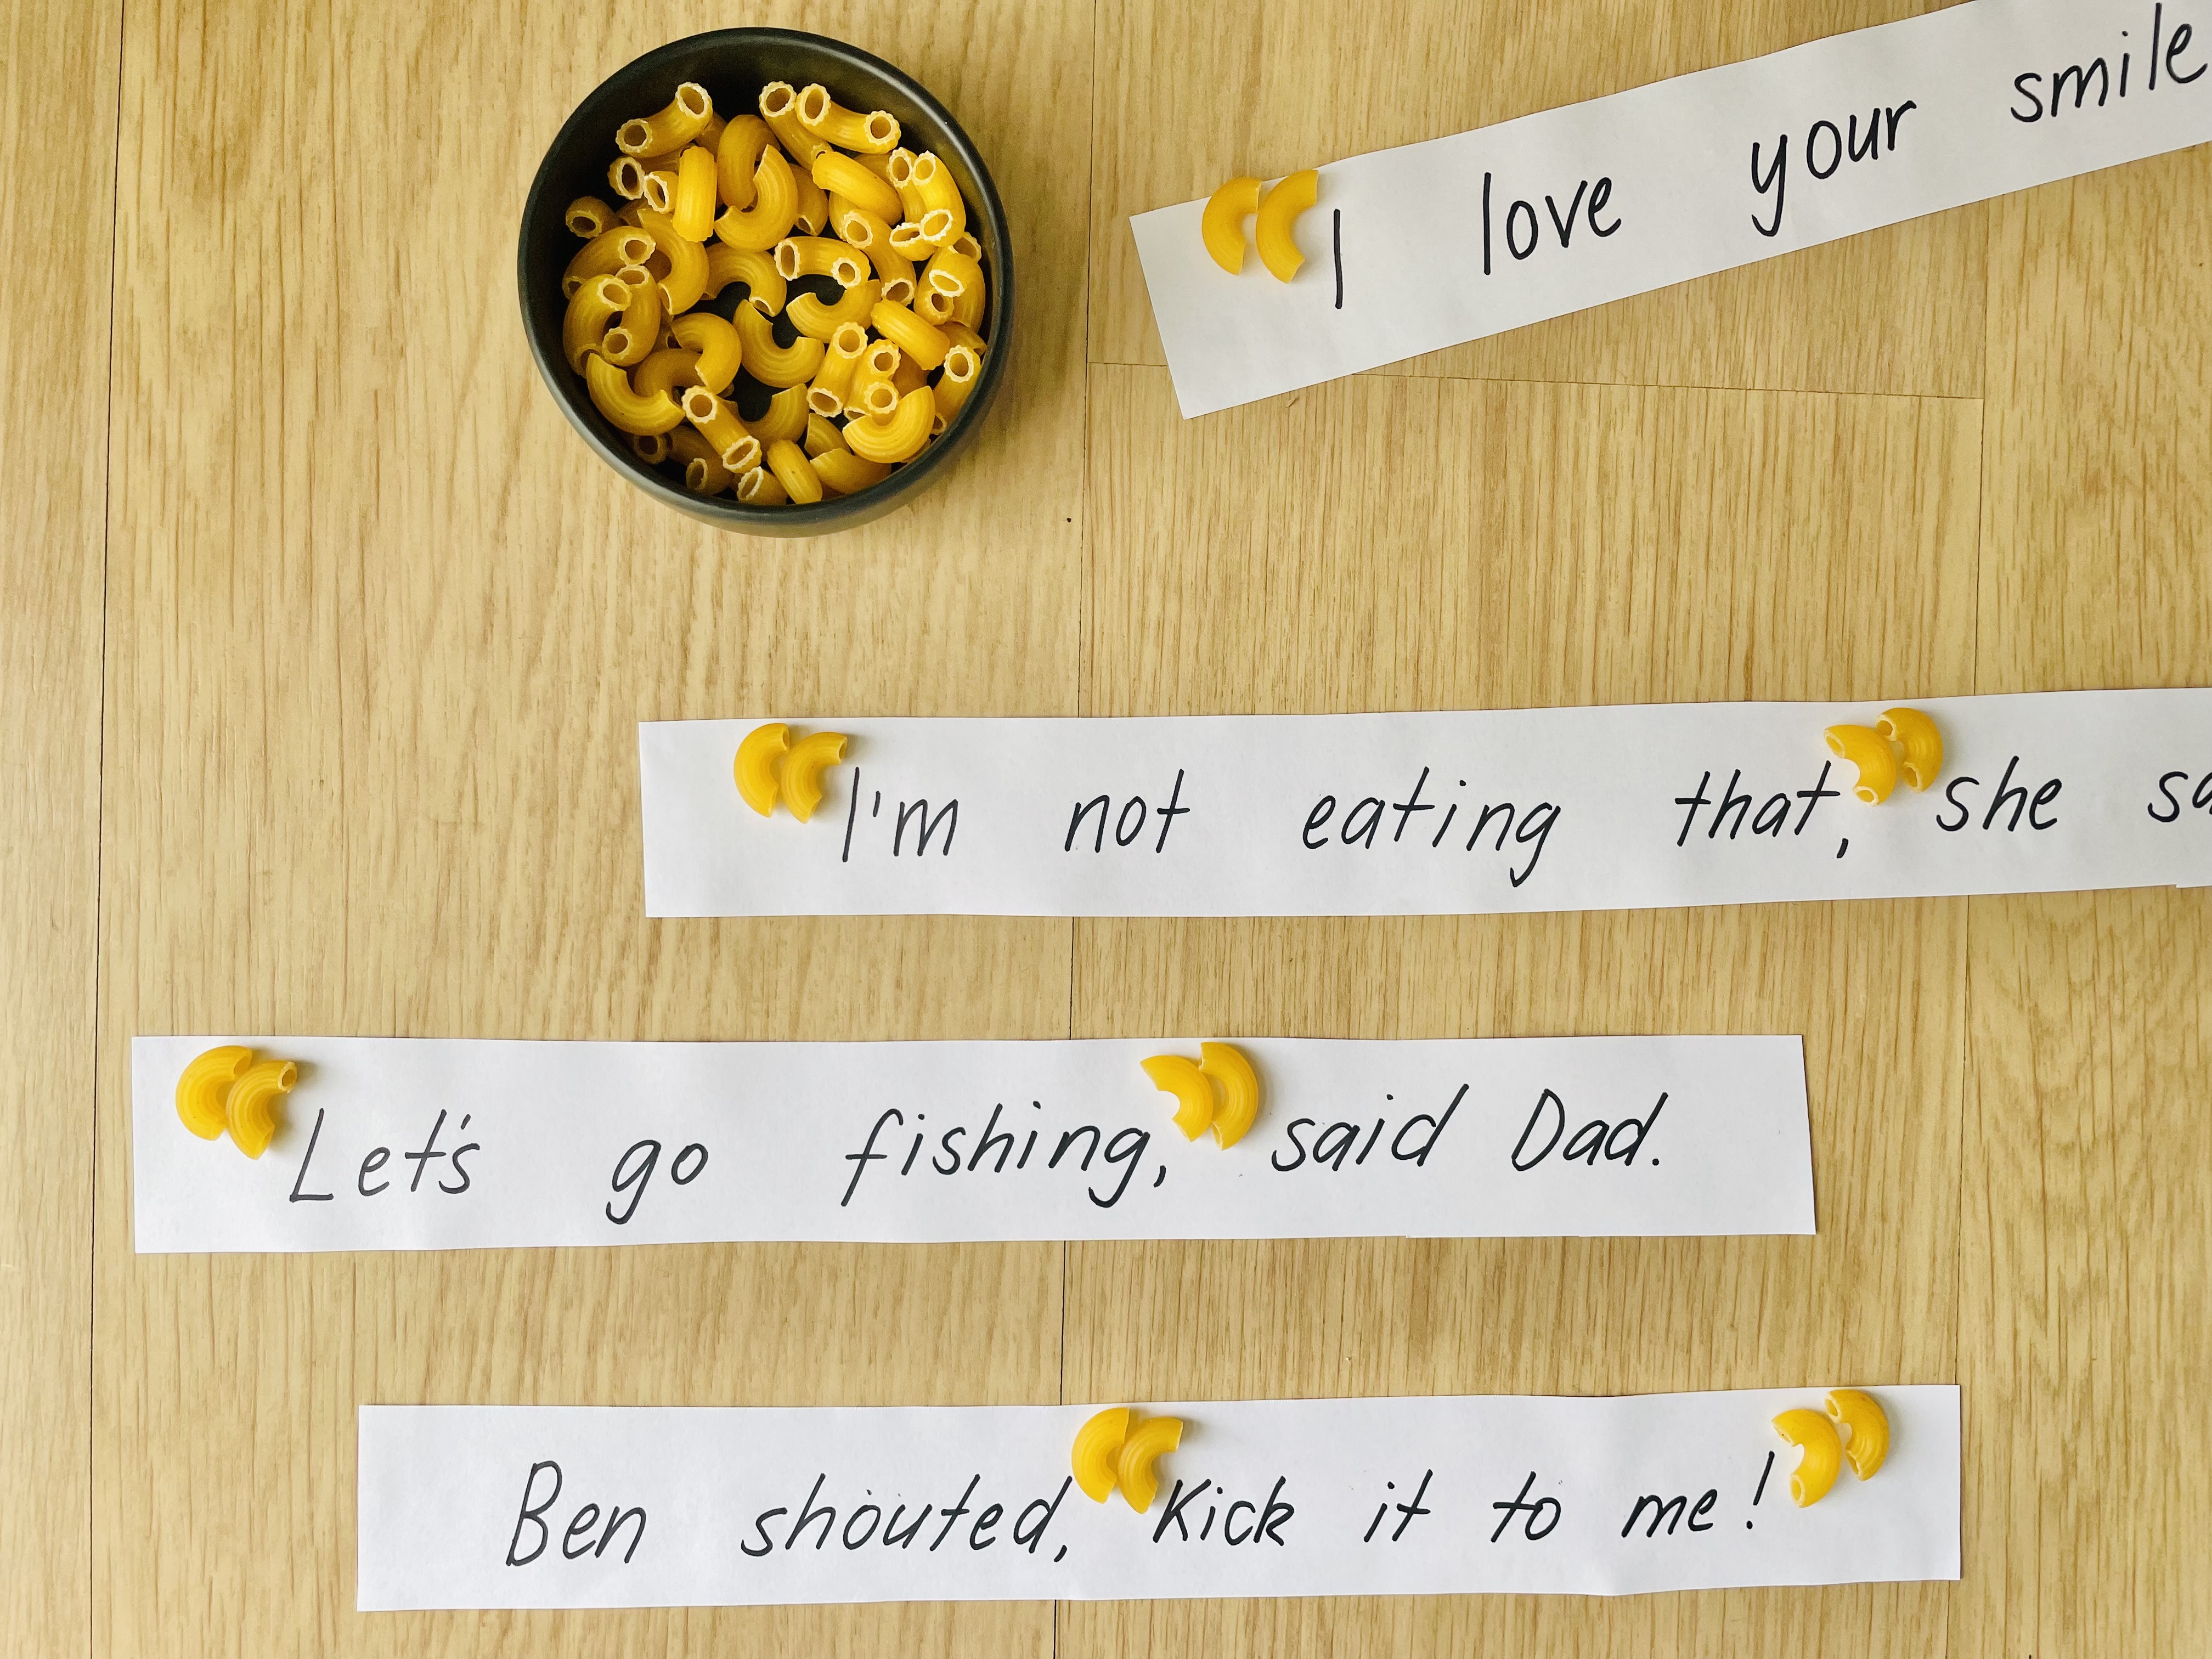 A fun punctuation lesson focused on the use of speech marks. Here we have sentence strips that have not been punctuated correctly. Students have used dry macaroni to show where the speech marks should be.